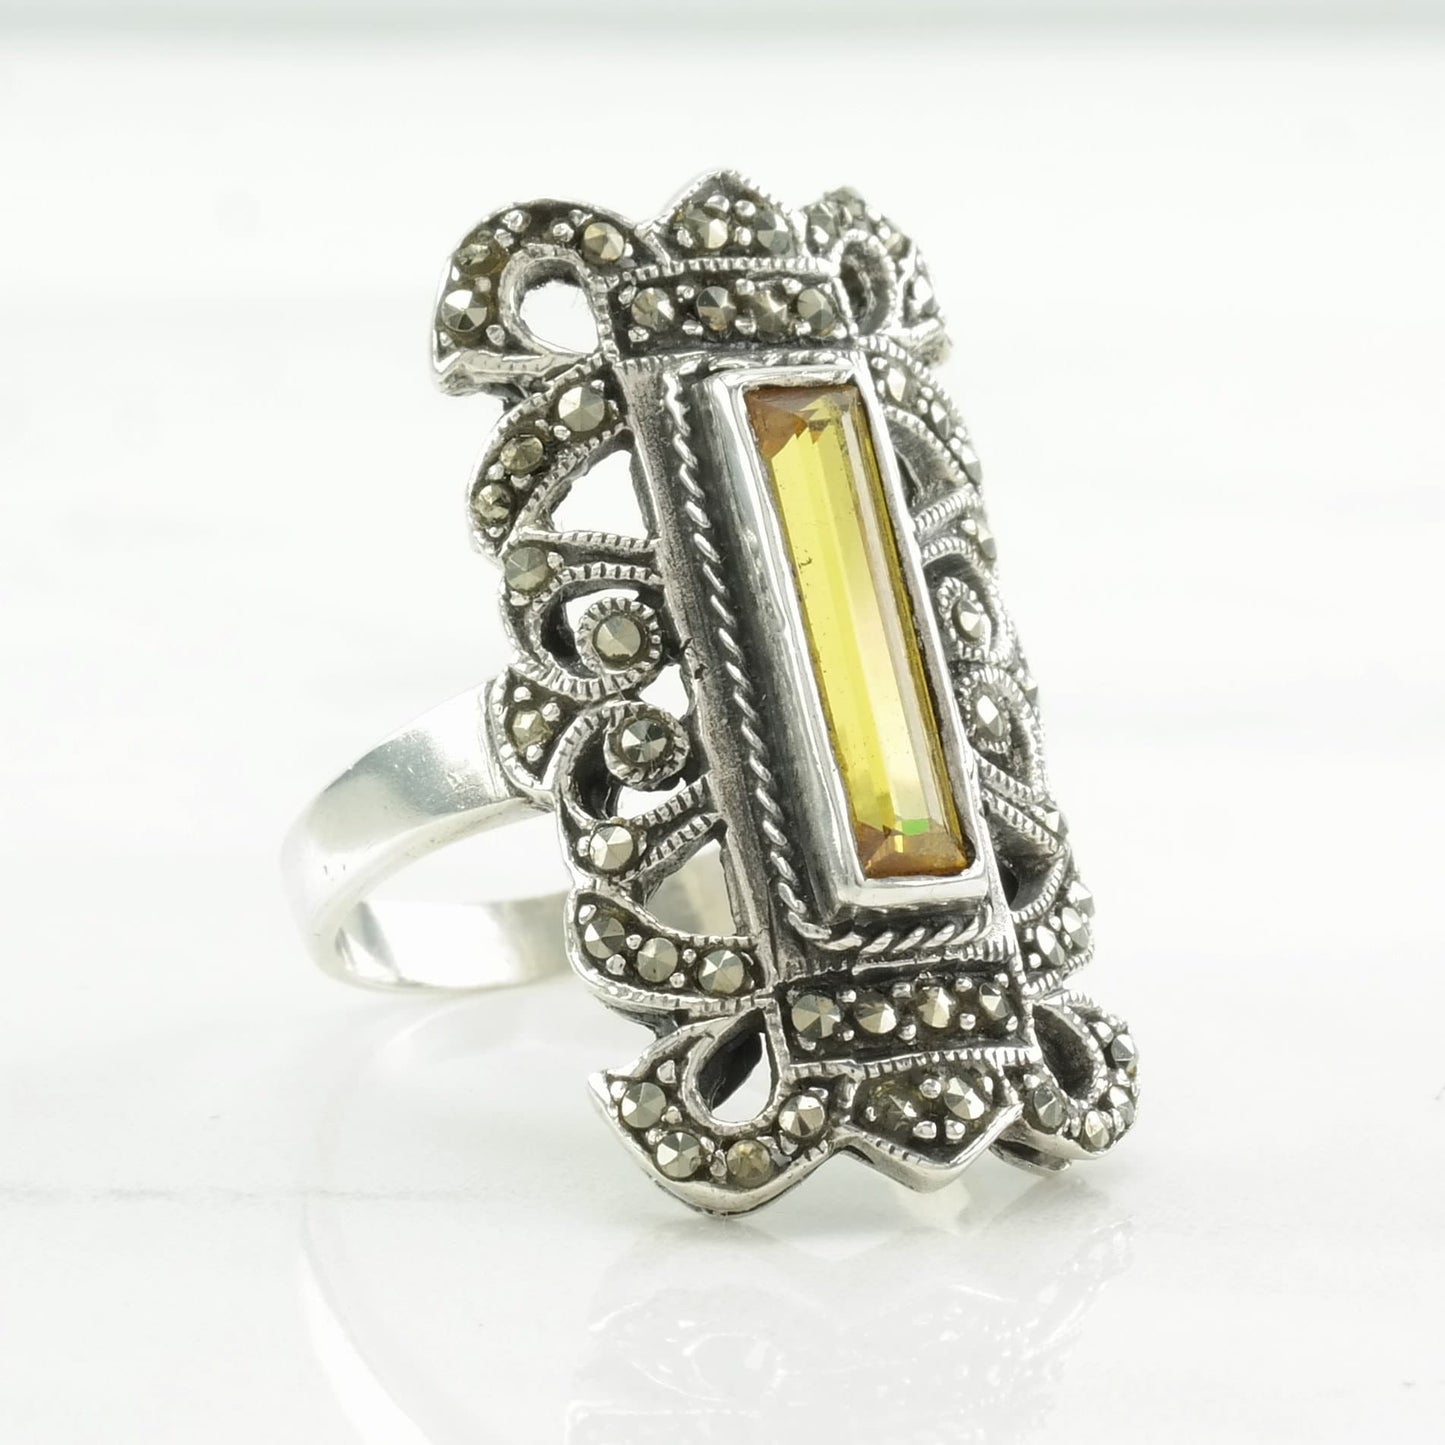 Vintage Art Deco Style Silver Ring Yellow Gemstone, Marcasite Sterling Size 9